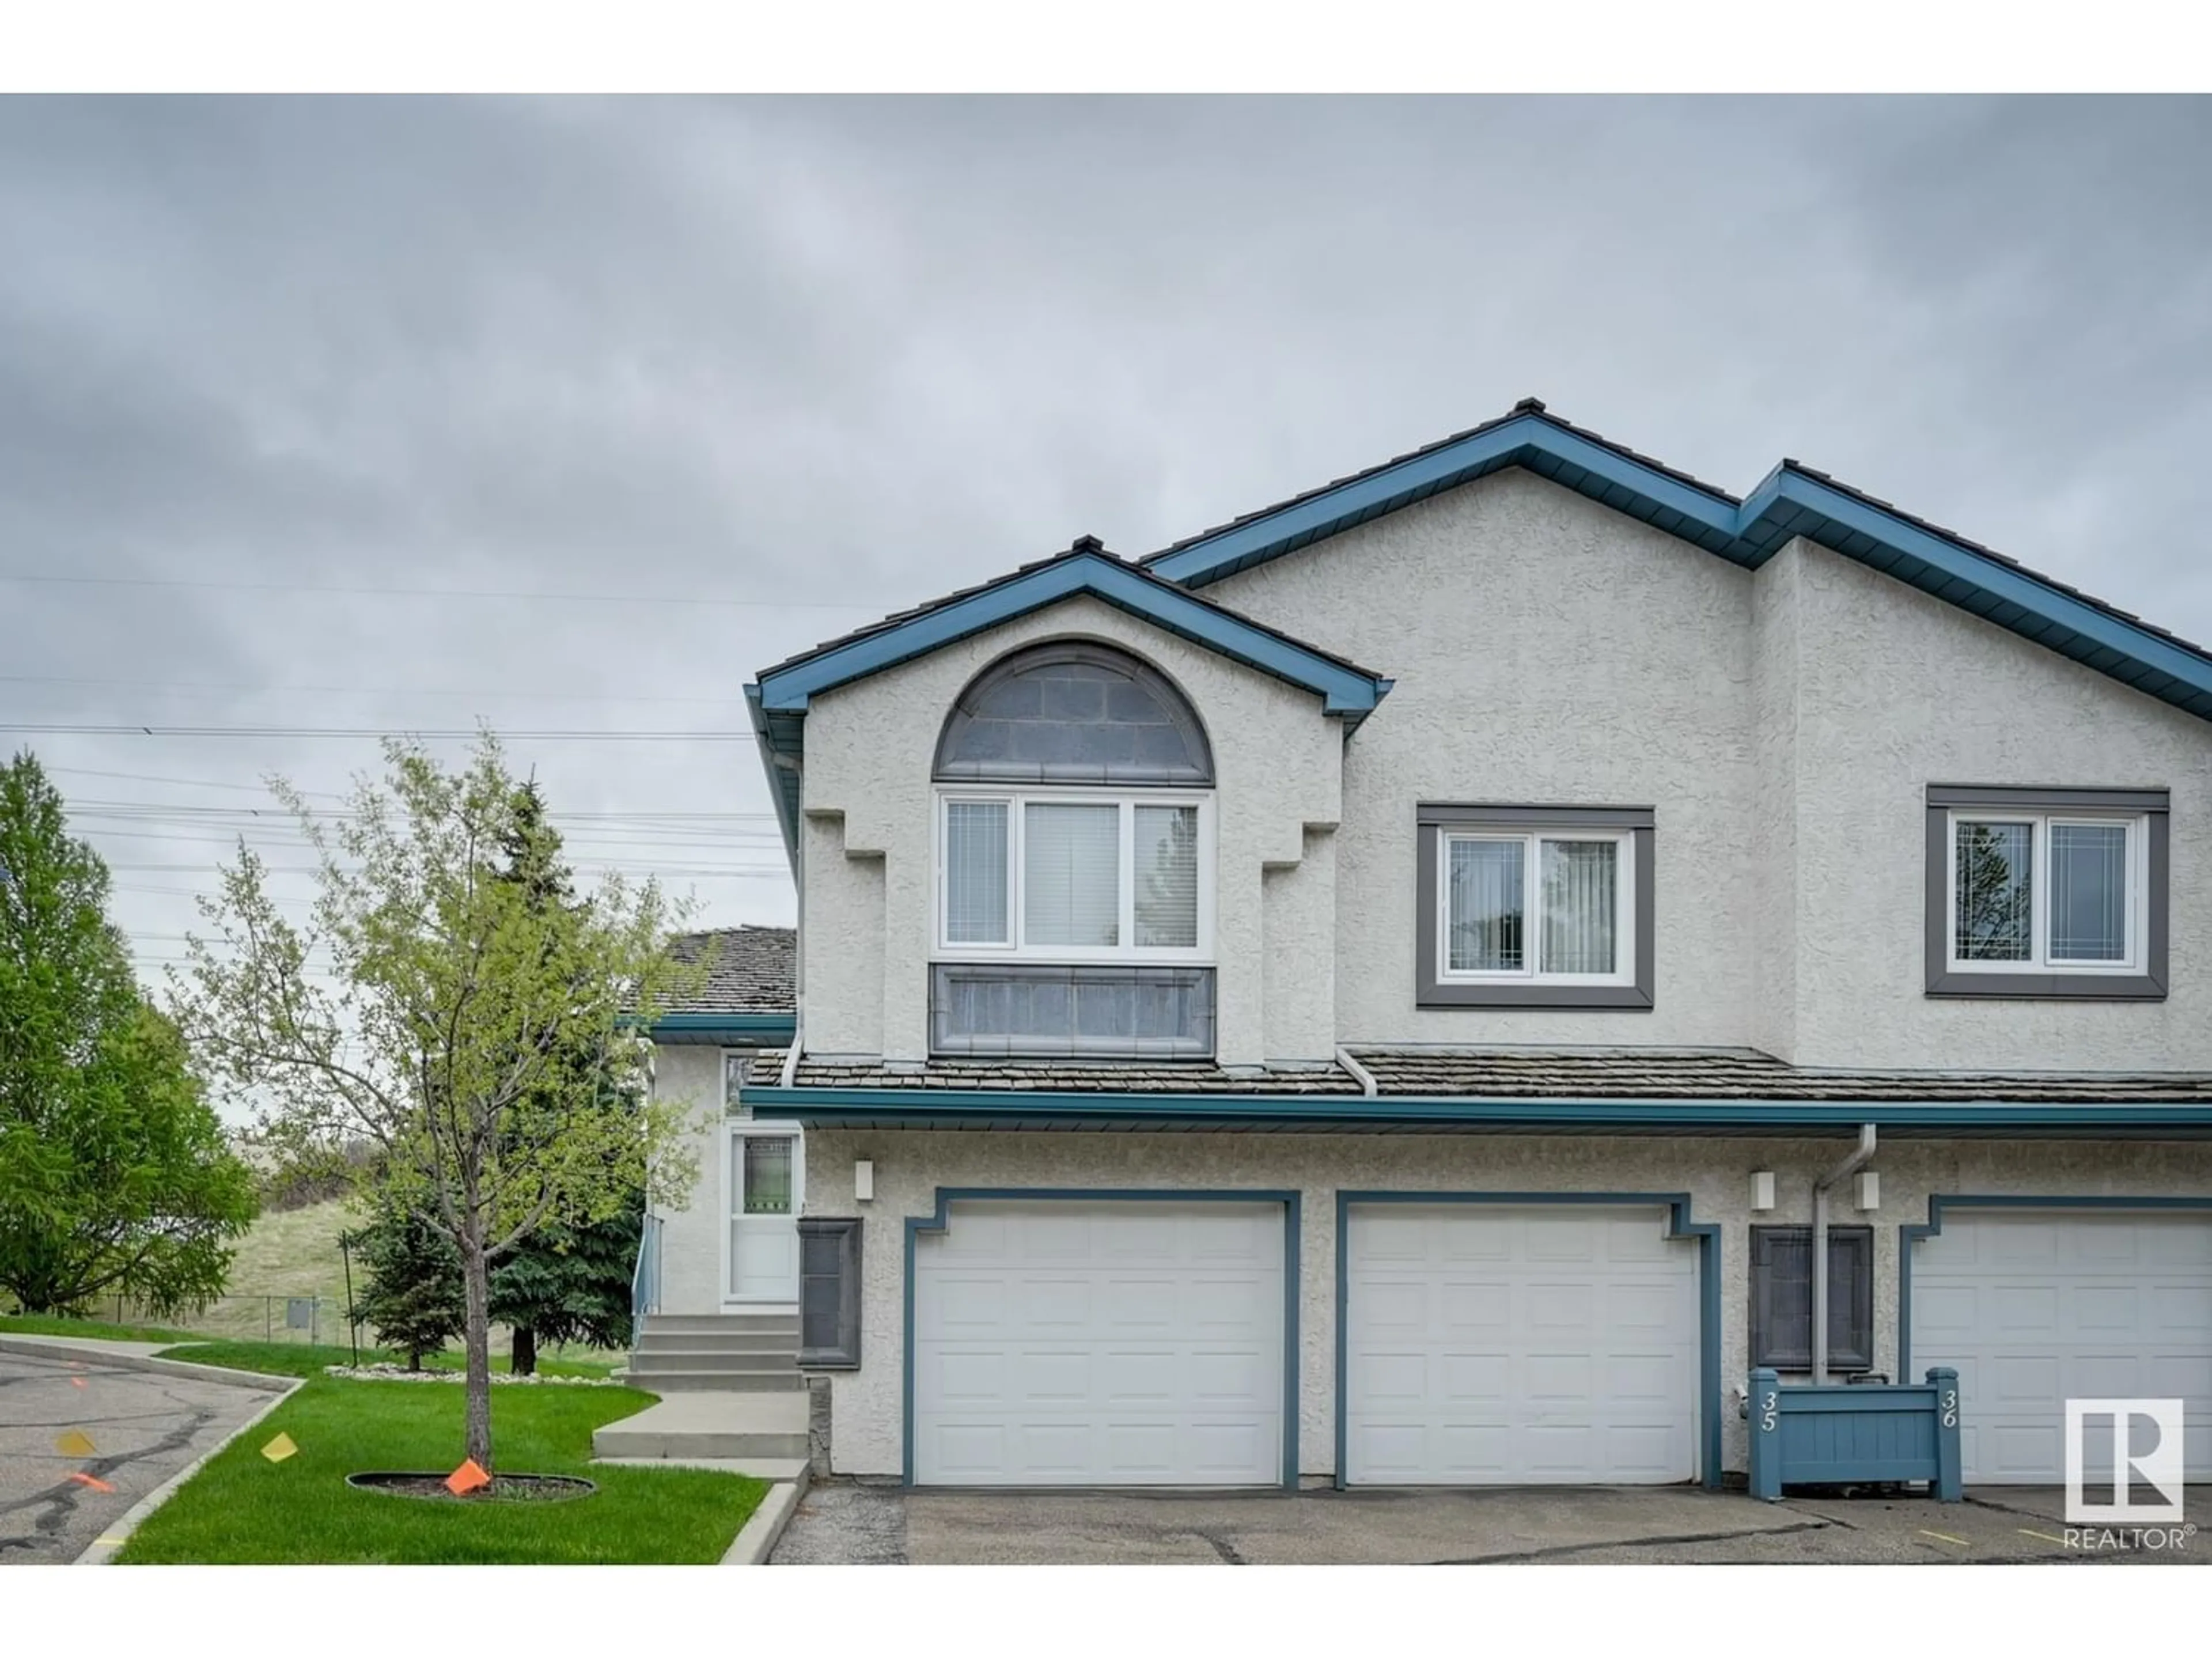 A pic from exterior of the house or condo for #35 1130 FALCONER RD NW, Edmonton Alberta T6R2J6